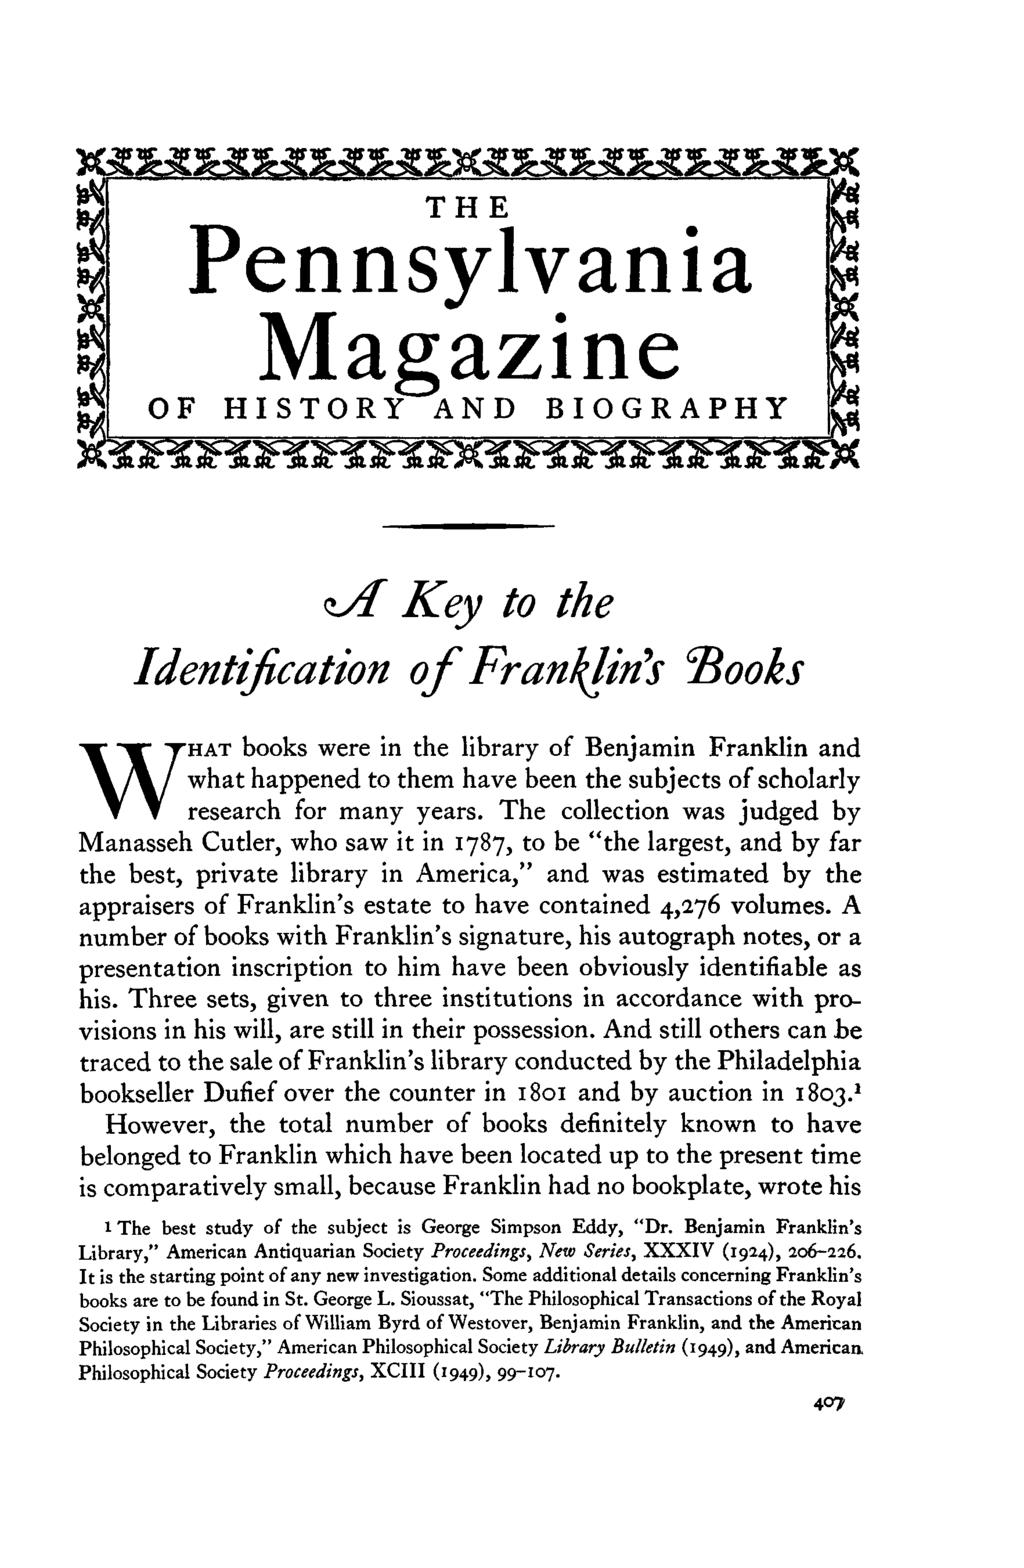 THE Pennsylvania Magazine OF HISTORY AND BIOGRAPHY A Key to the Identification of Franklin's Books W HAT books were in the library of Benjamin Franklin and what happened to them have been the